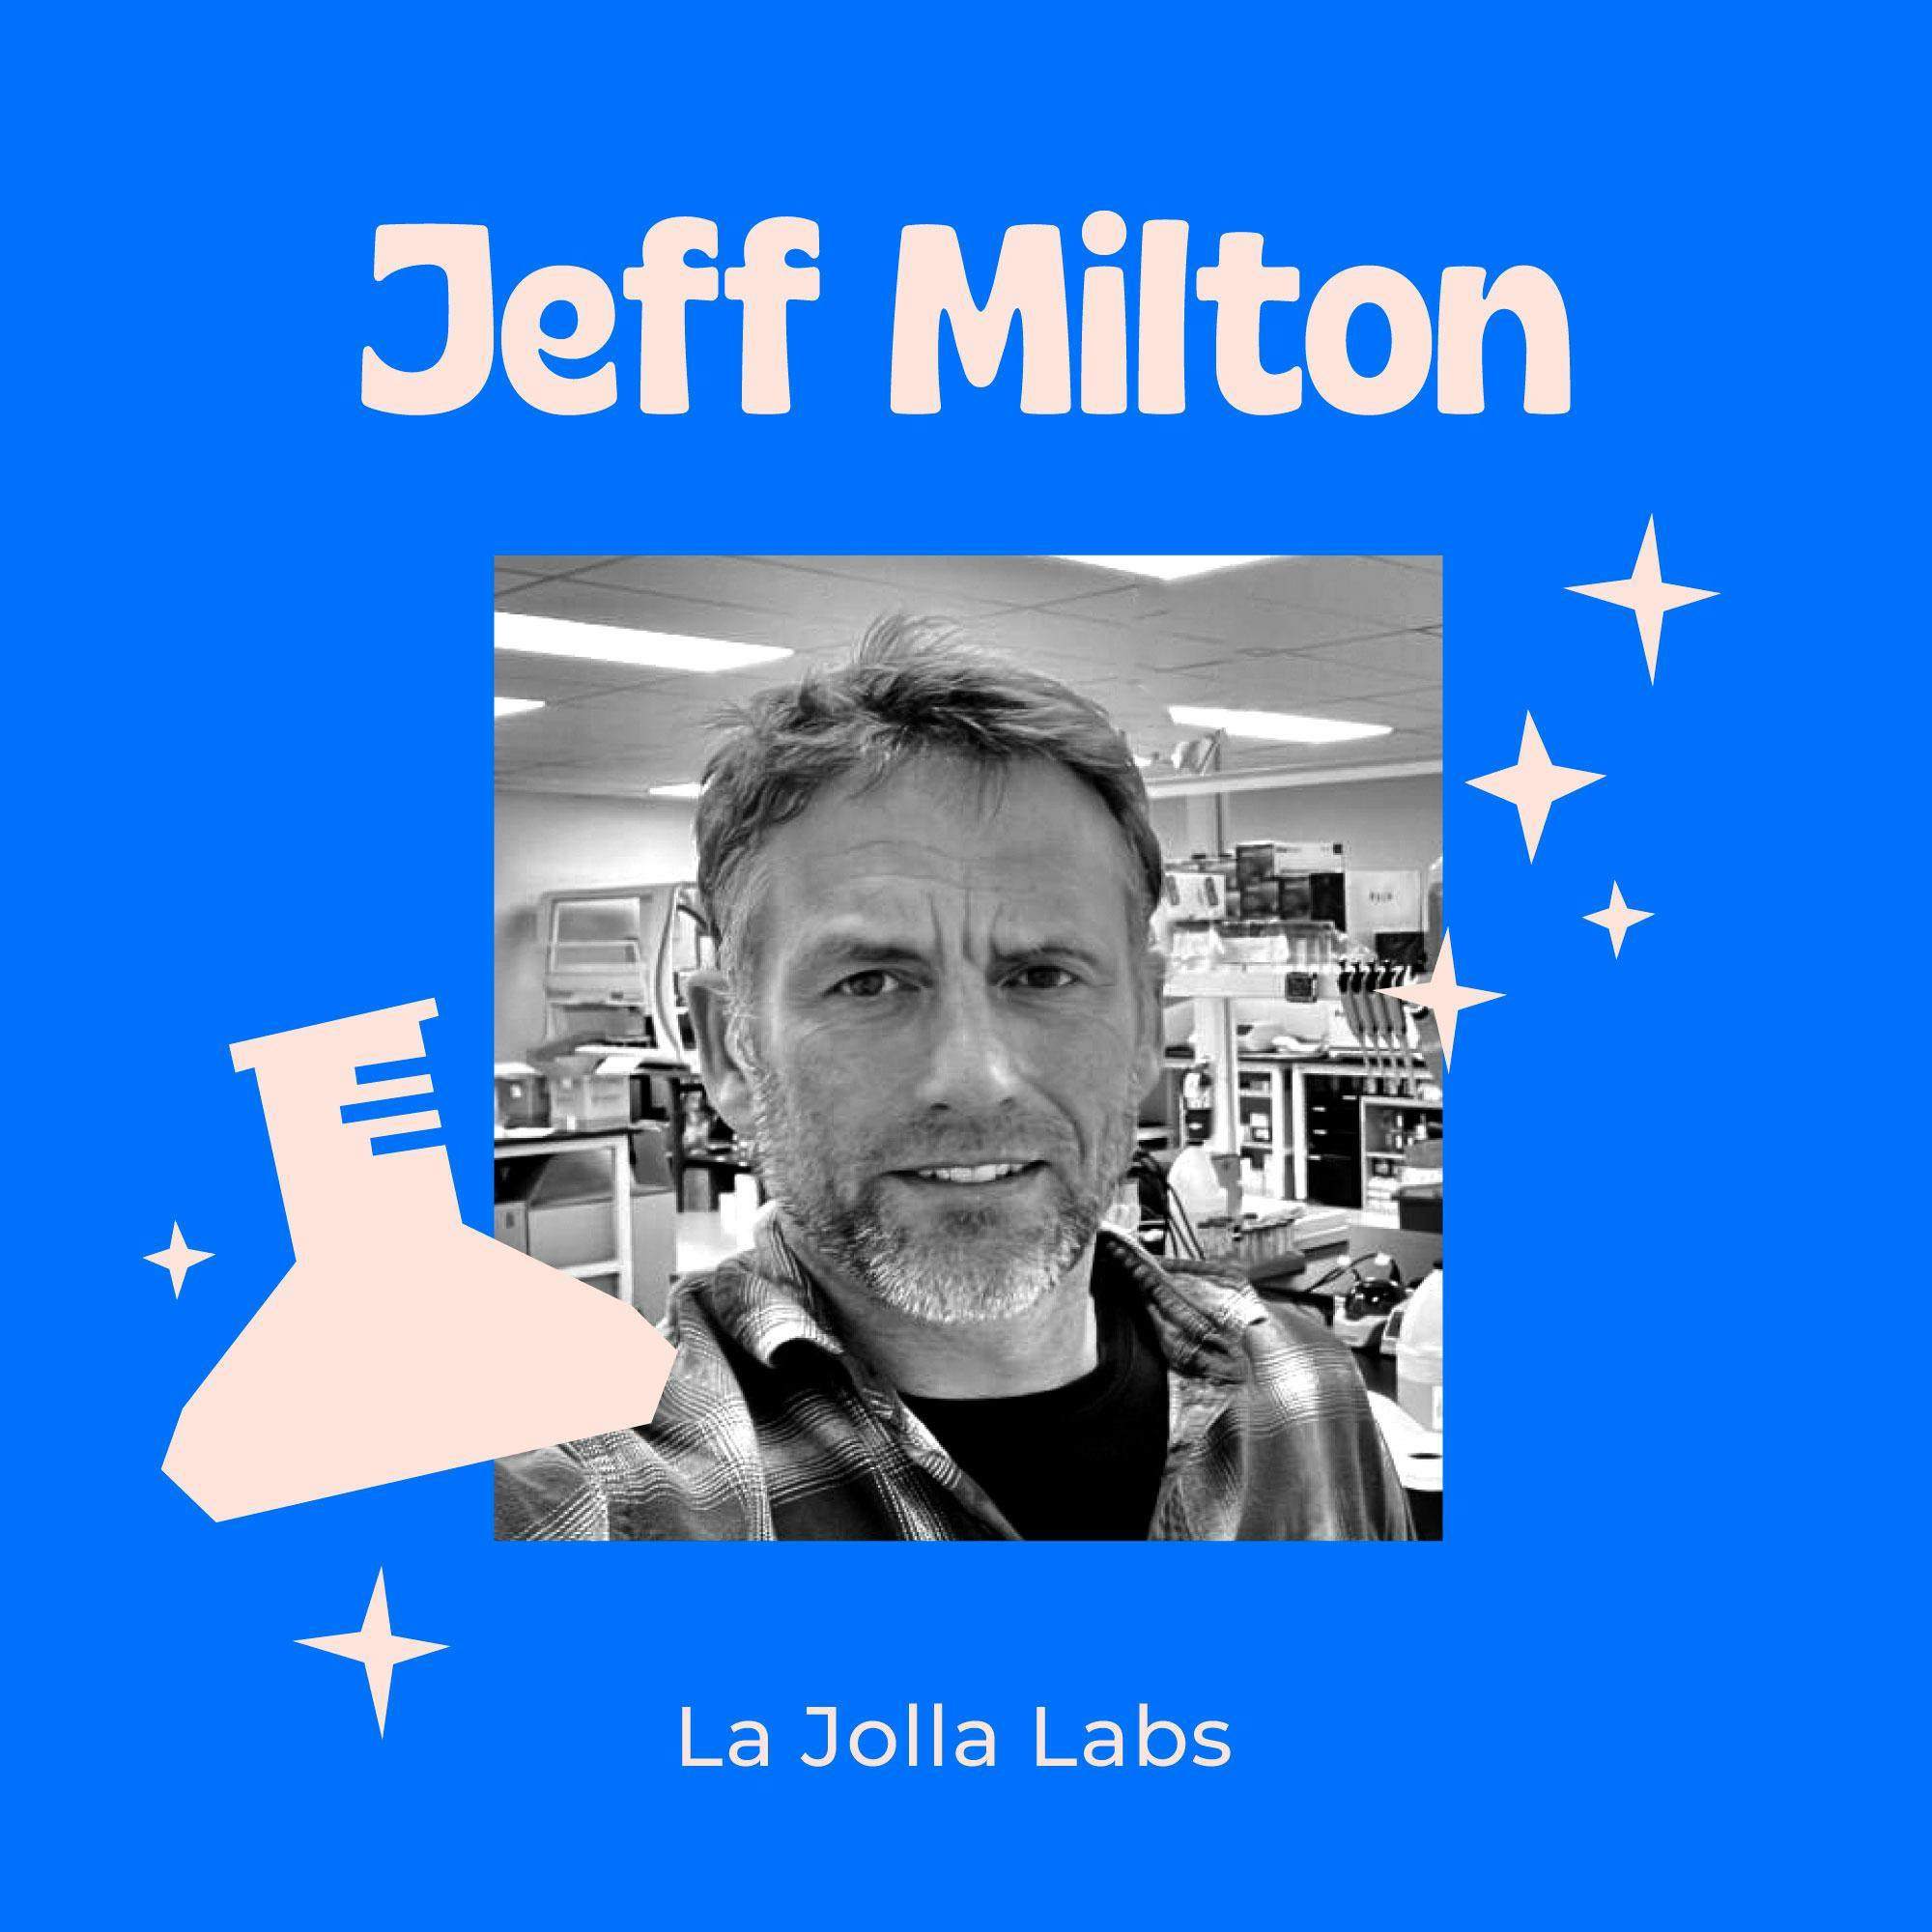 Developing Personalized Therapeutics for Ultra Rare Patients with La Jolla Labs CEO Jeff Milton